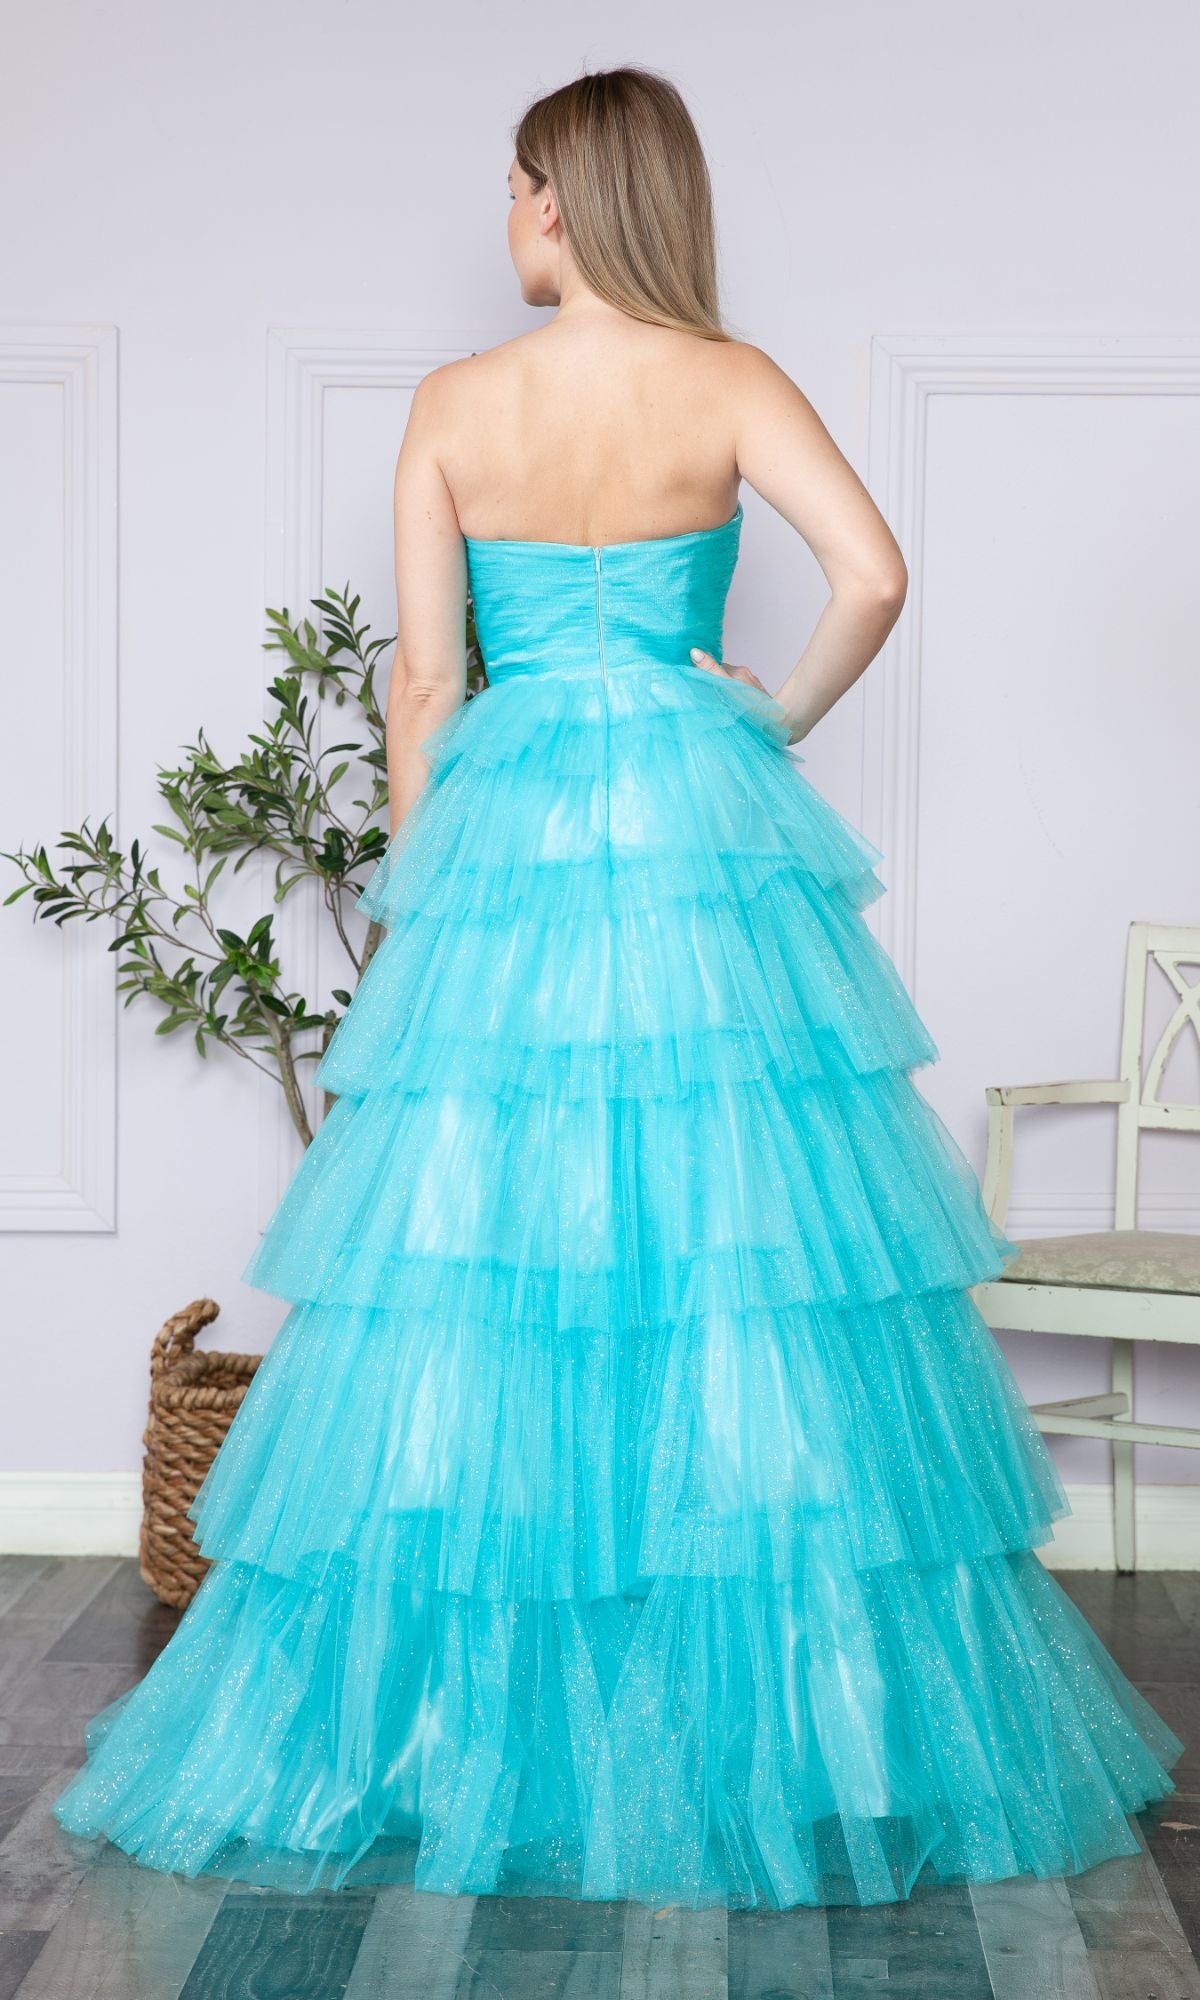 Strapless Long Tiered Glitter Prom Ball Gown 9386